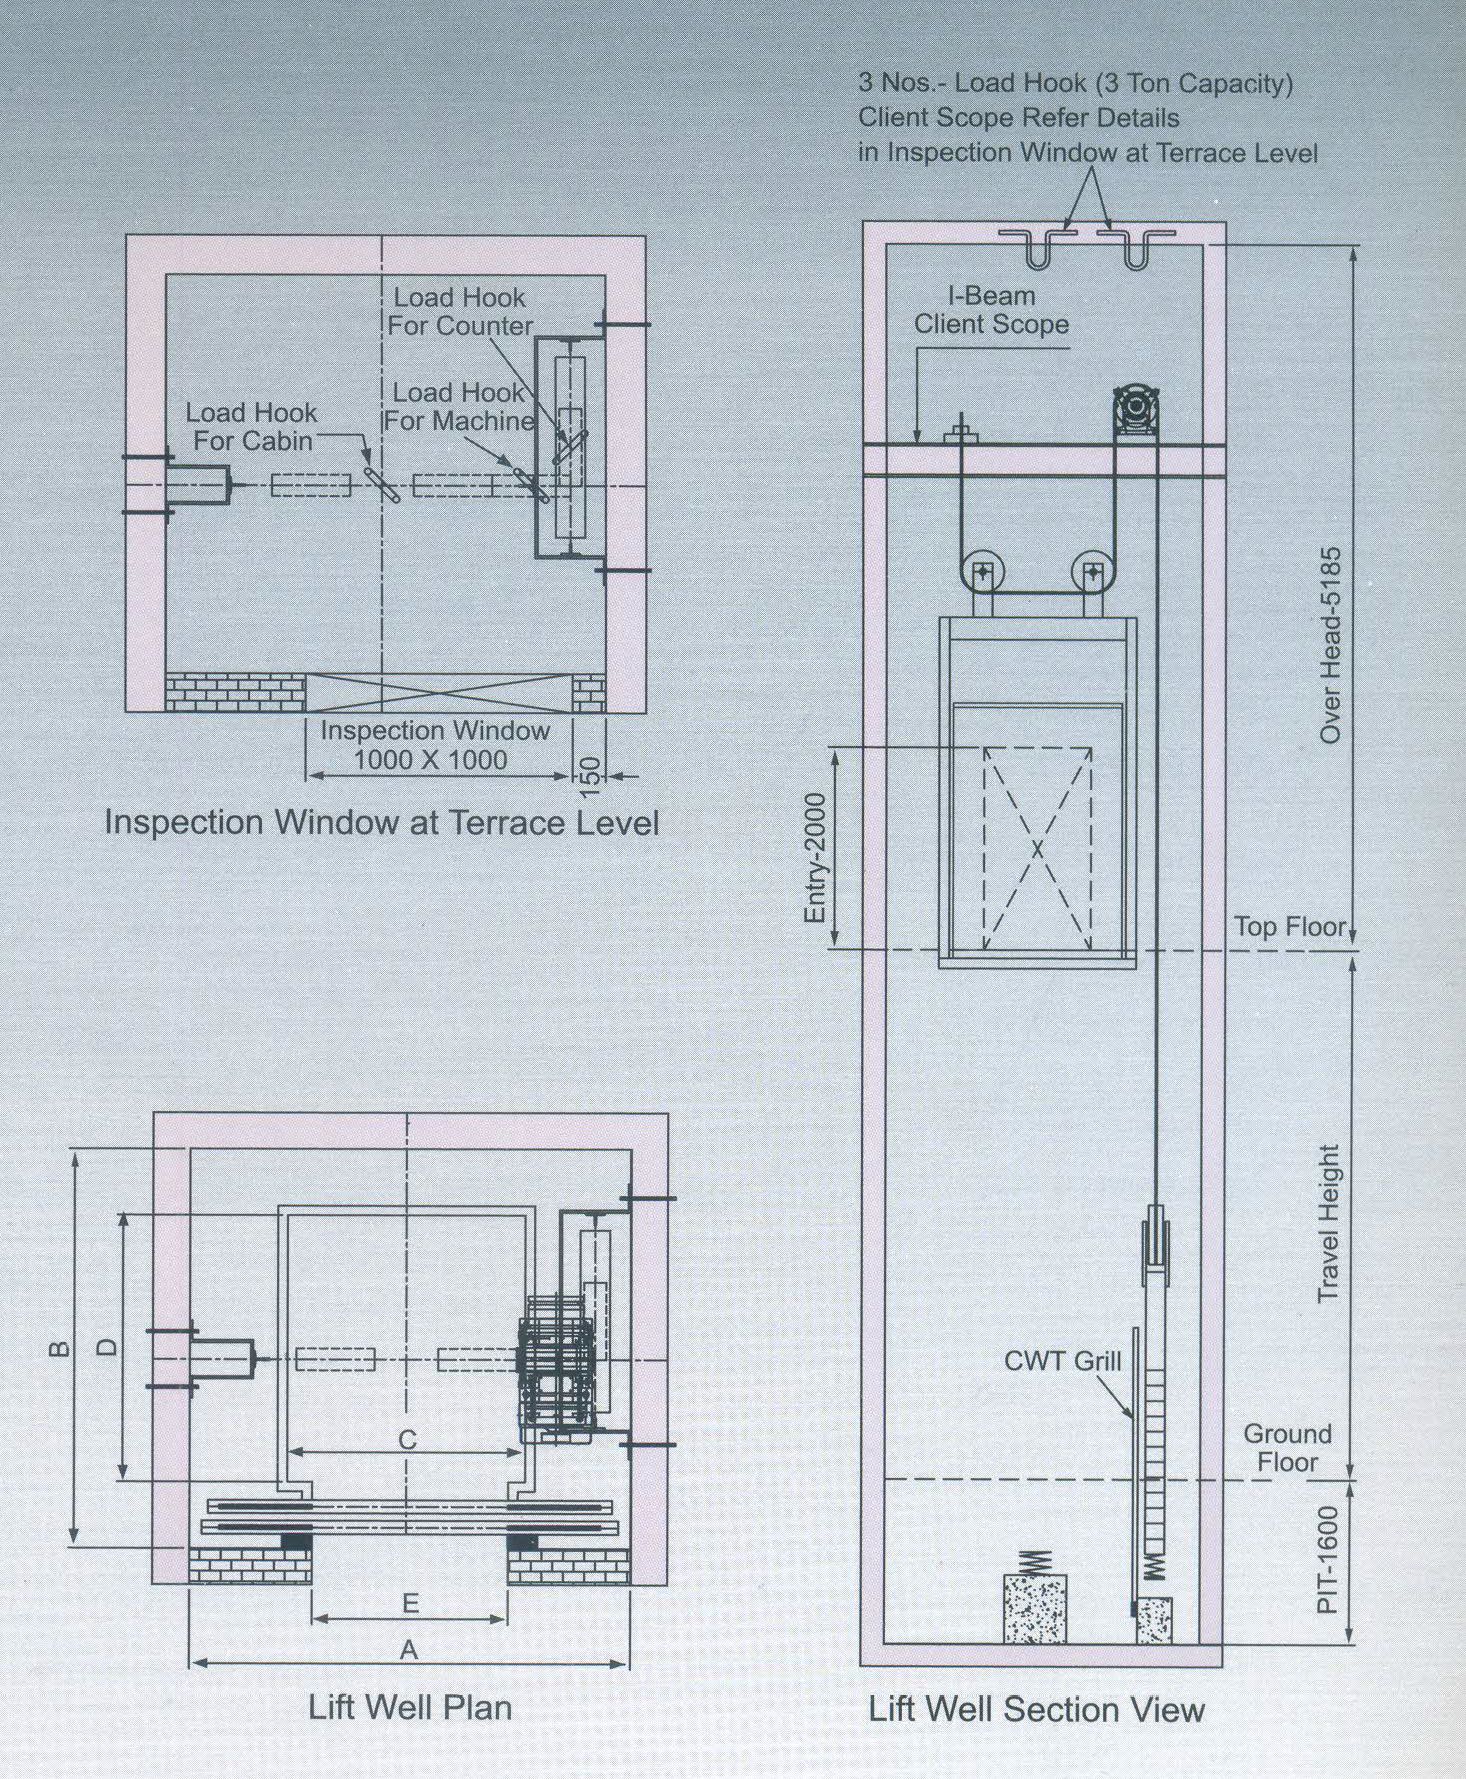 Lift Section Diagram - Wiring Diagram